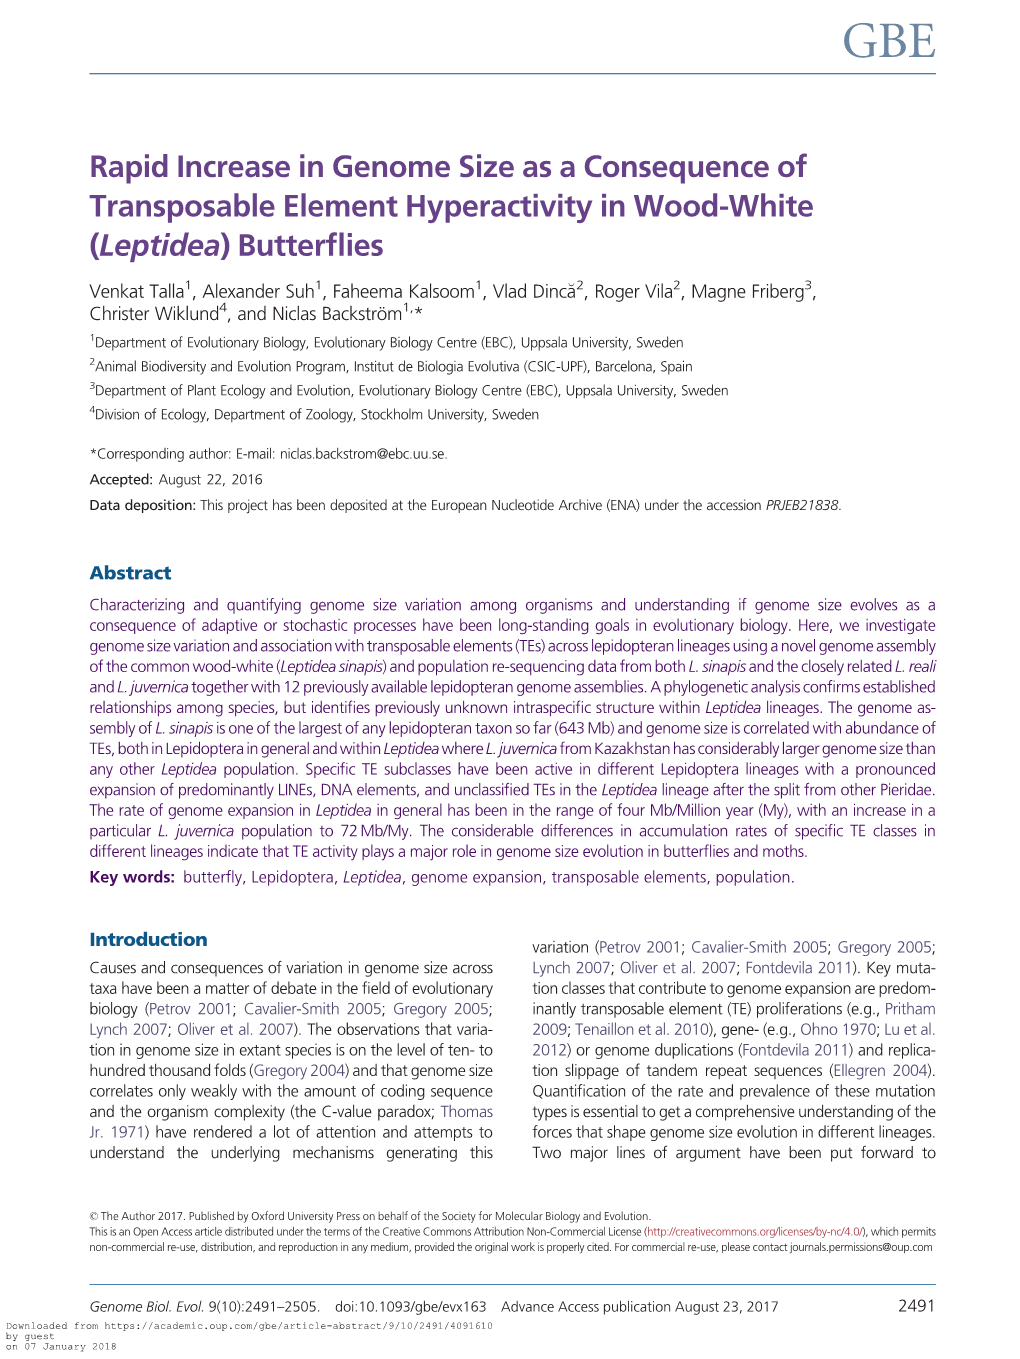 Rapid Increase in Genome Size As a Consequence of Transposable Element Hyperactivity in Wood-White (Leptidea) Butterflies